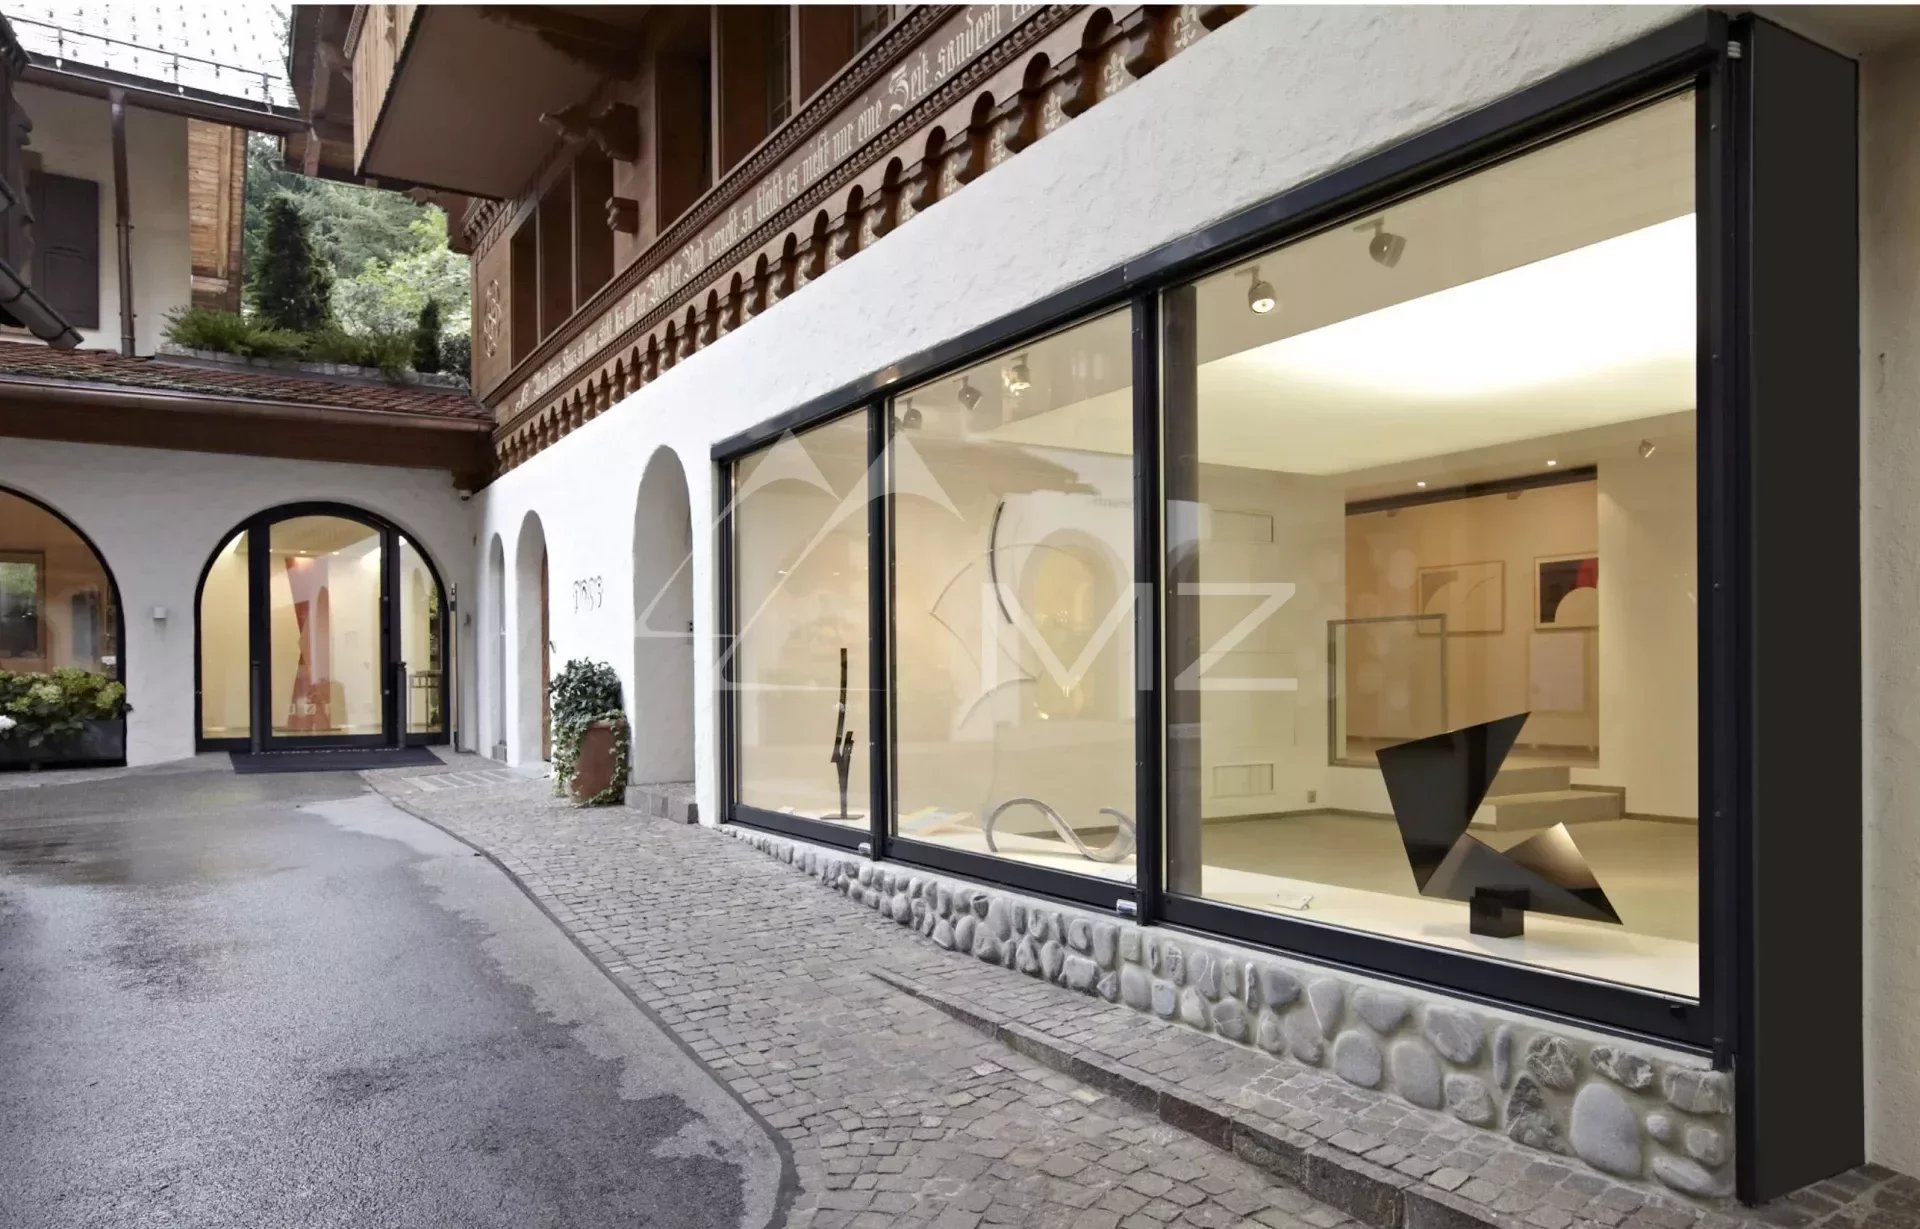 Espace commercial - Galerie Gstaad